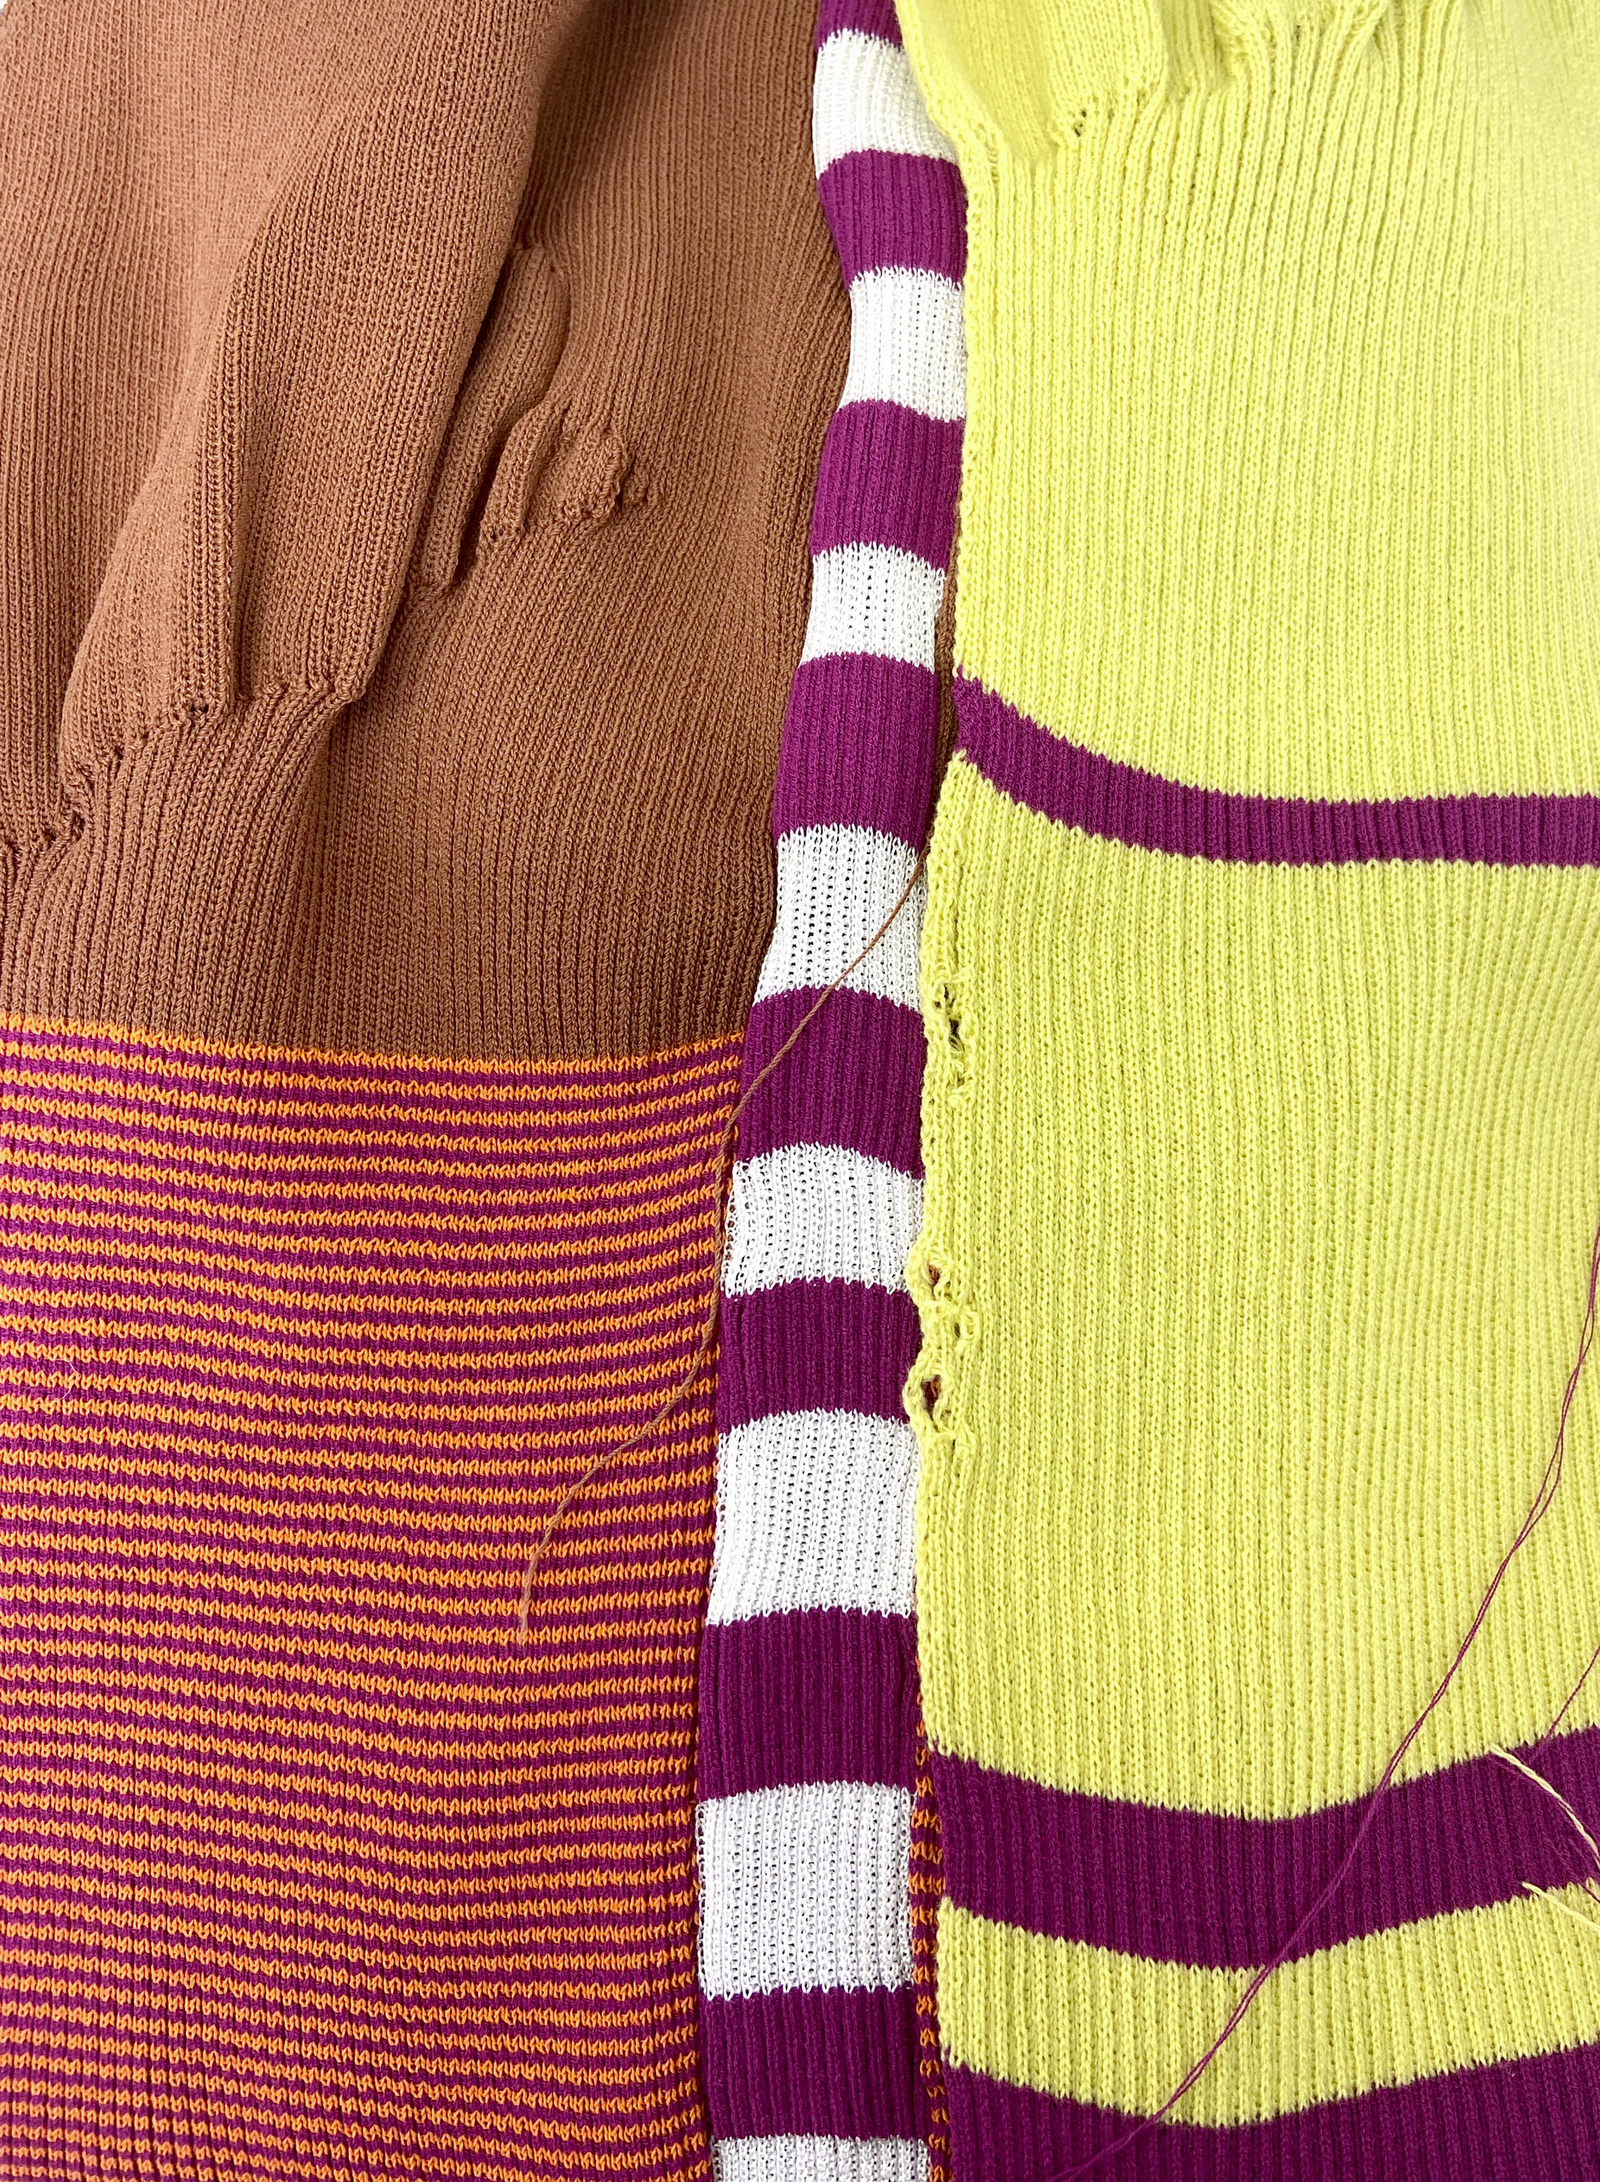 Close up image of three knitted fabrics that have been made from stripe and rib techniques.